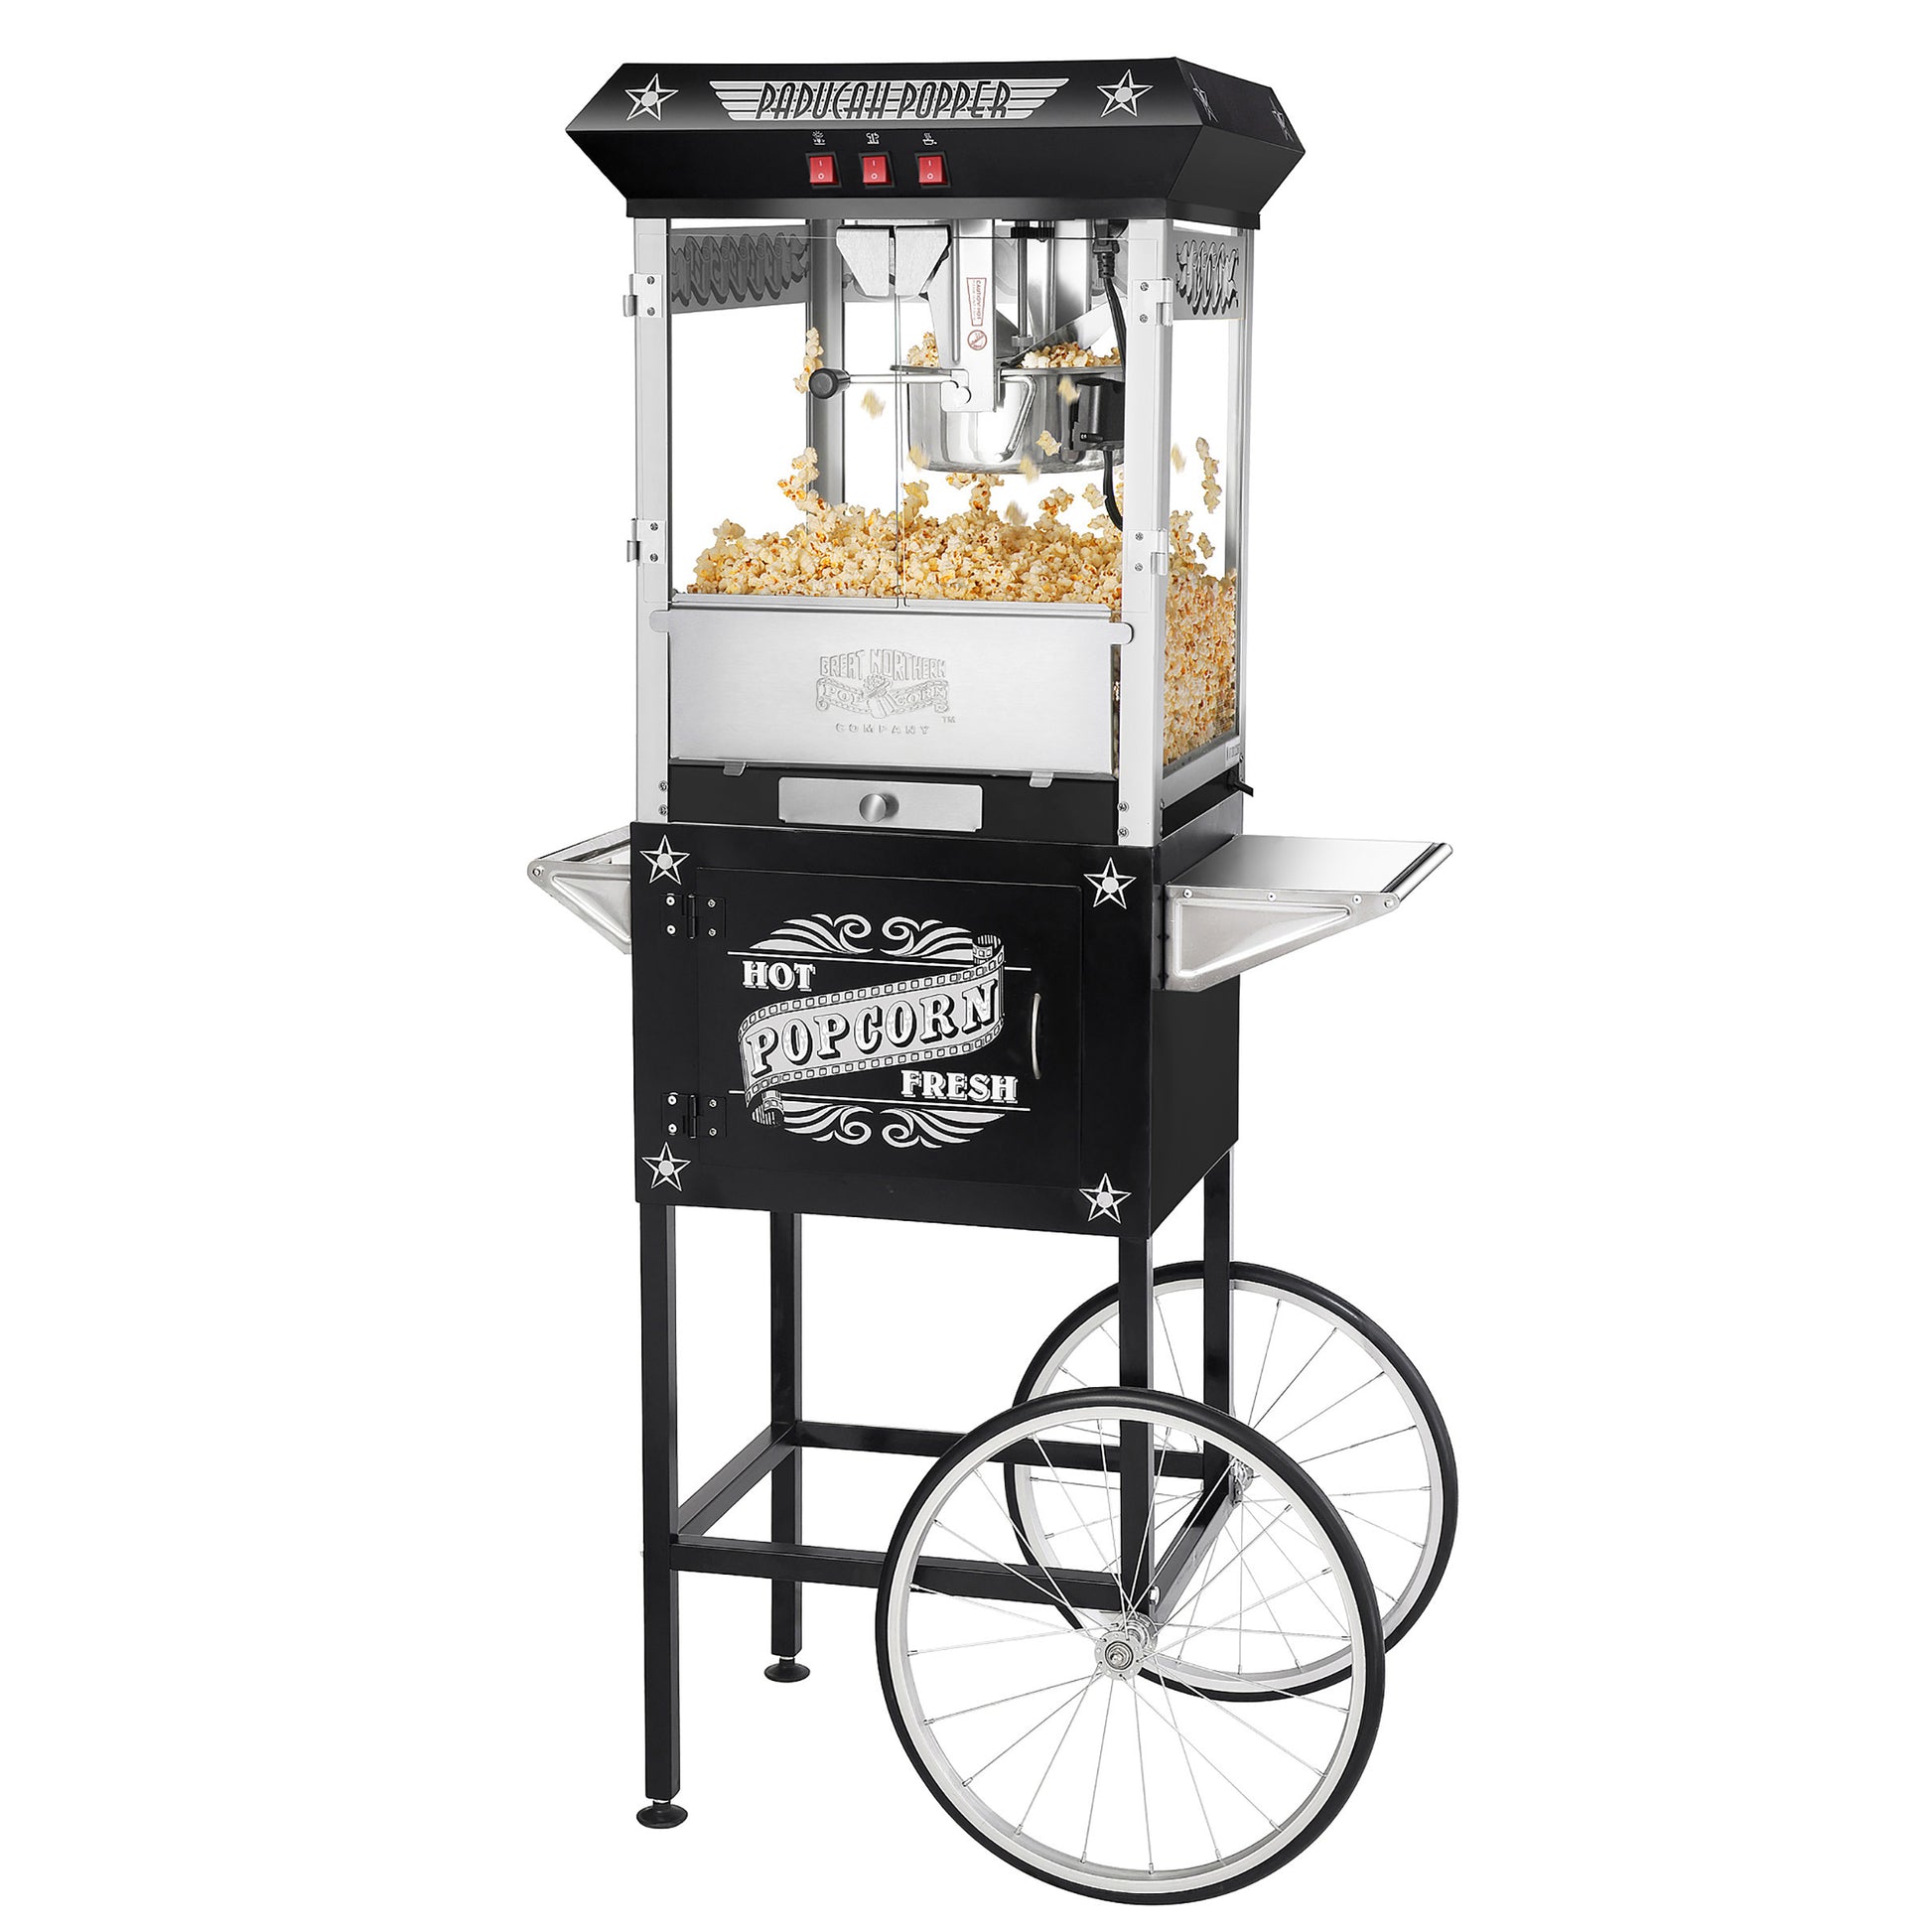 Great Northern Popcorn Black Paducah 8 Ounce Antique Popcorn Machine and Cart